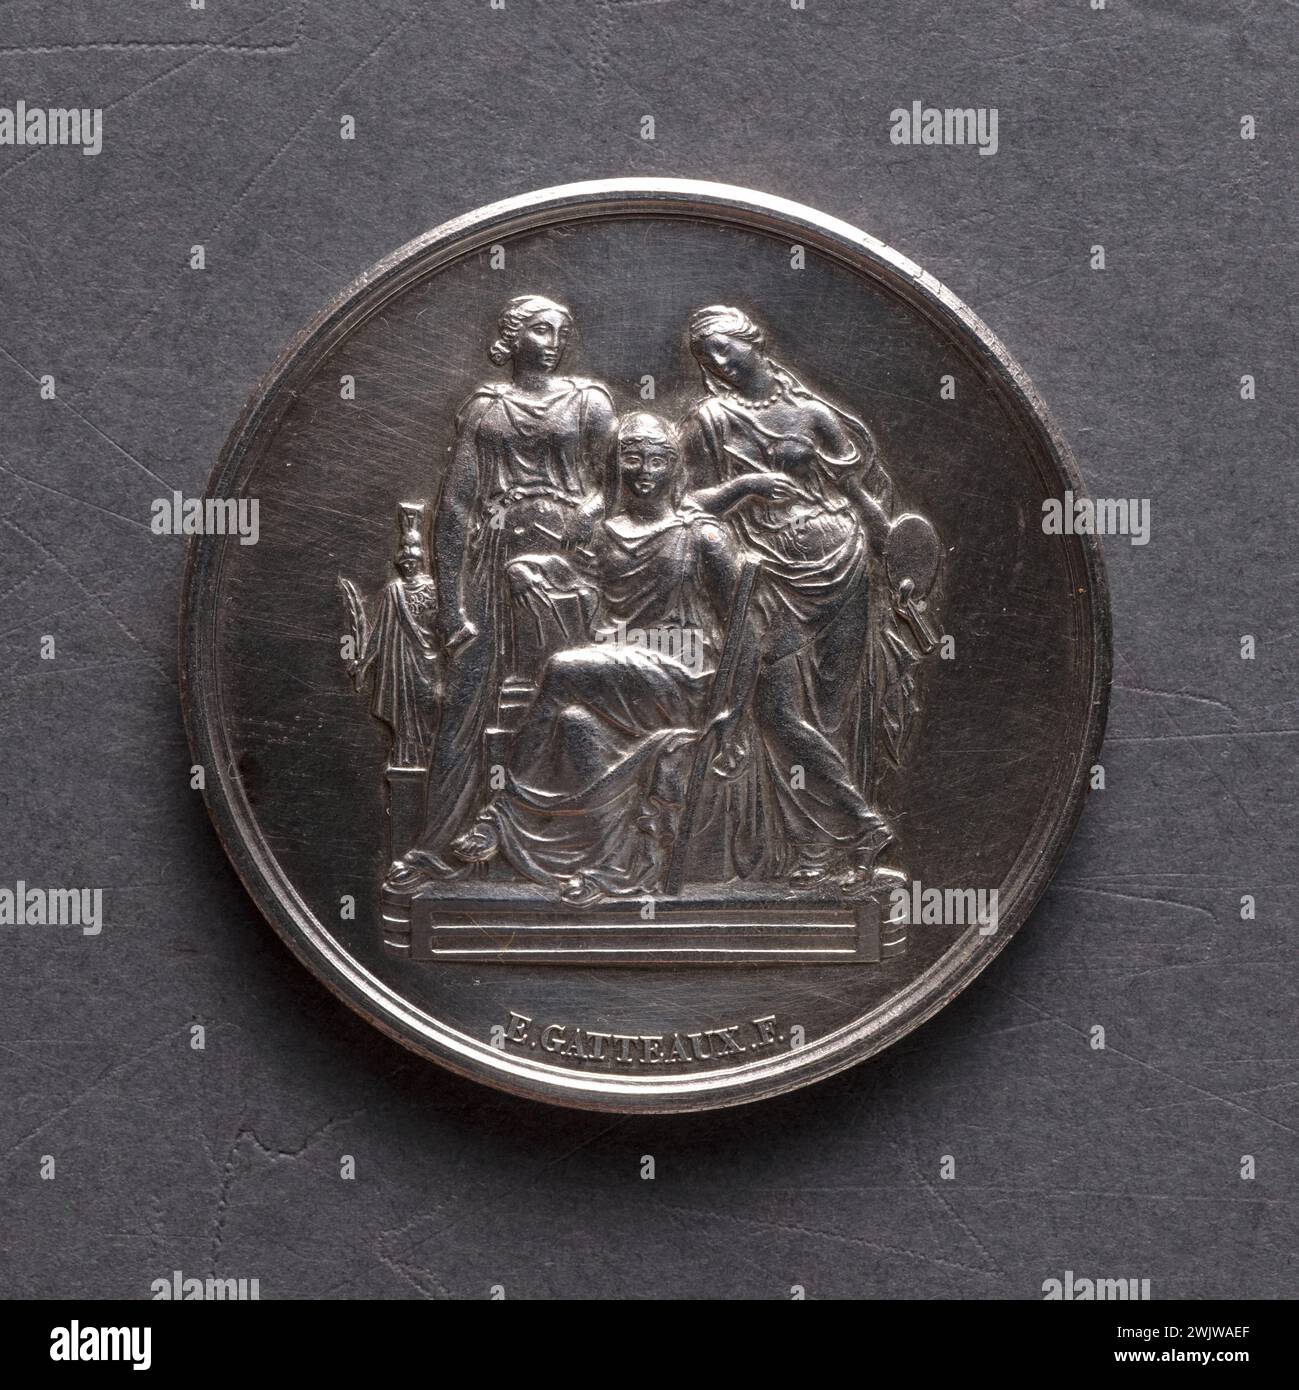 E.GATTEAUX. National School of Fine Arts. Medal in honor of Mr. Girault, in the field of descriptive geometry. 1874. Museum of Fine Arts of the City of Paris, Petit Palais. 79761-17 Allegory, allegorical figure, geometry, mathematics, medal, commemorative object, allegorical character, exact sciences, formal sciences, 19th 19th 19th 19th 19th 19th century Stock Photo